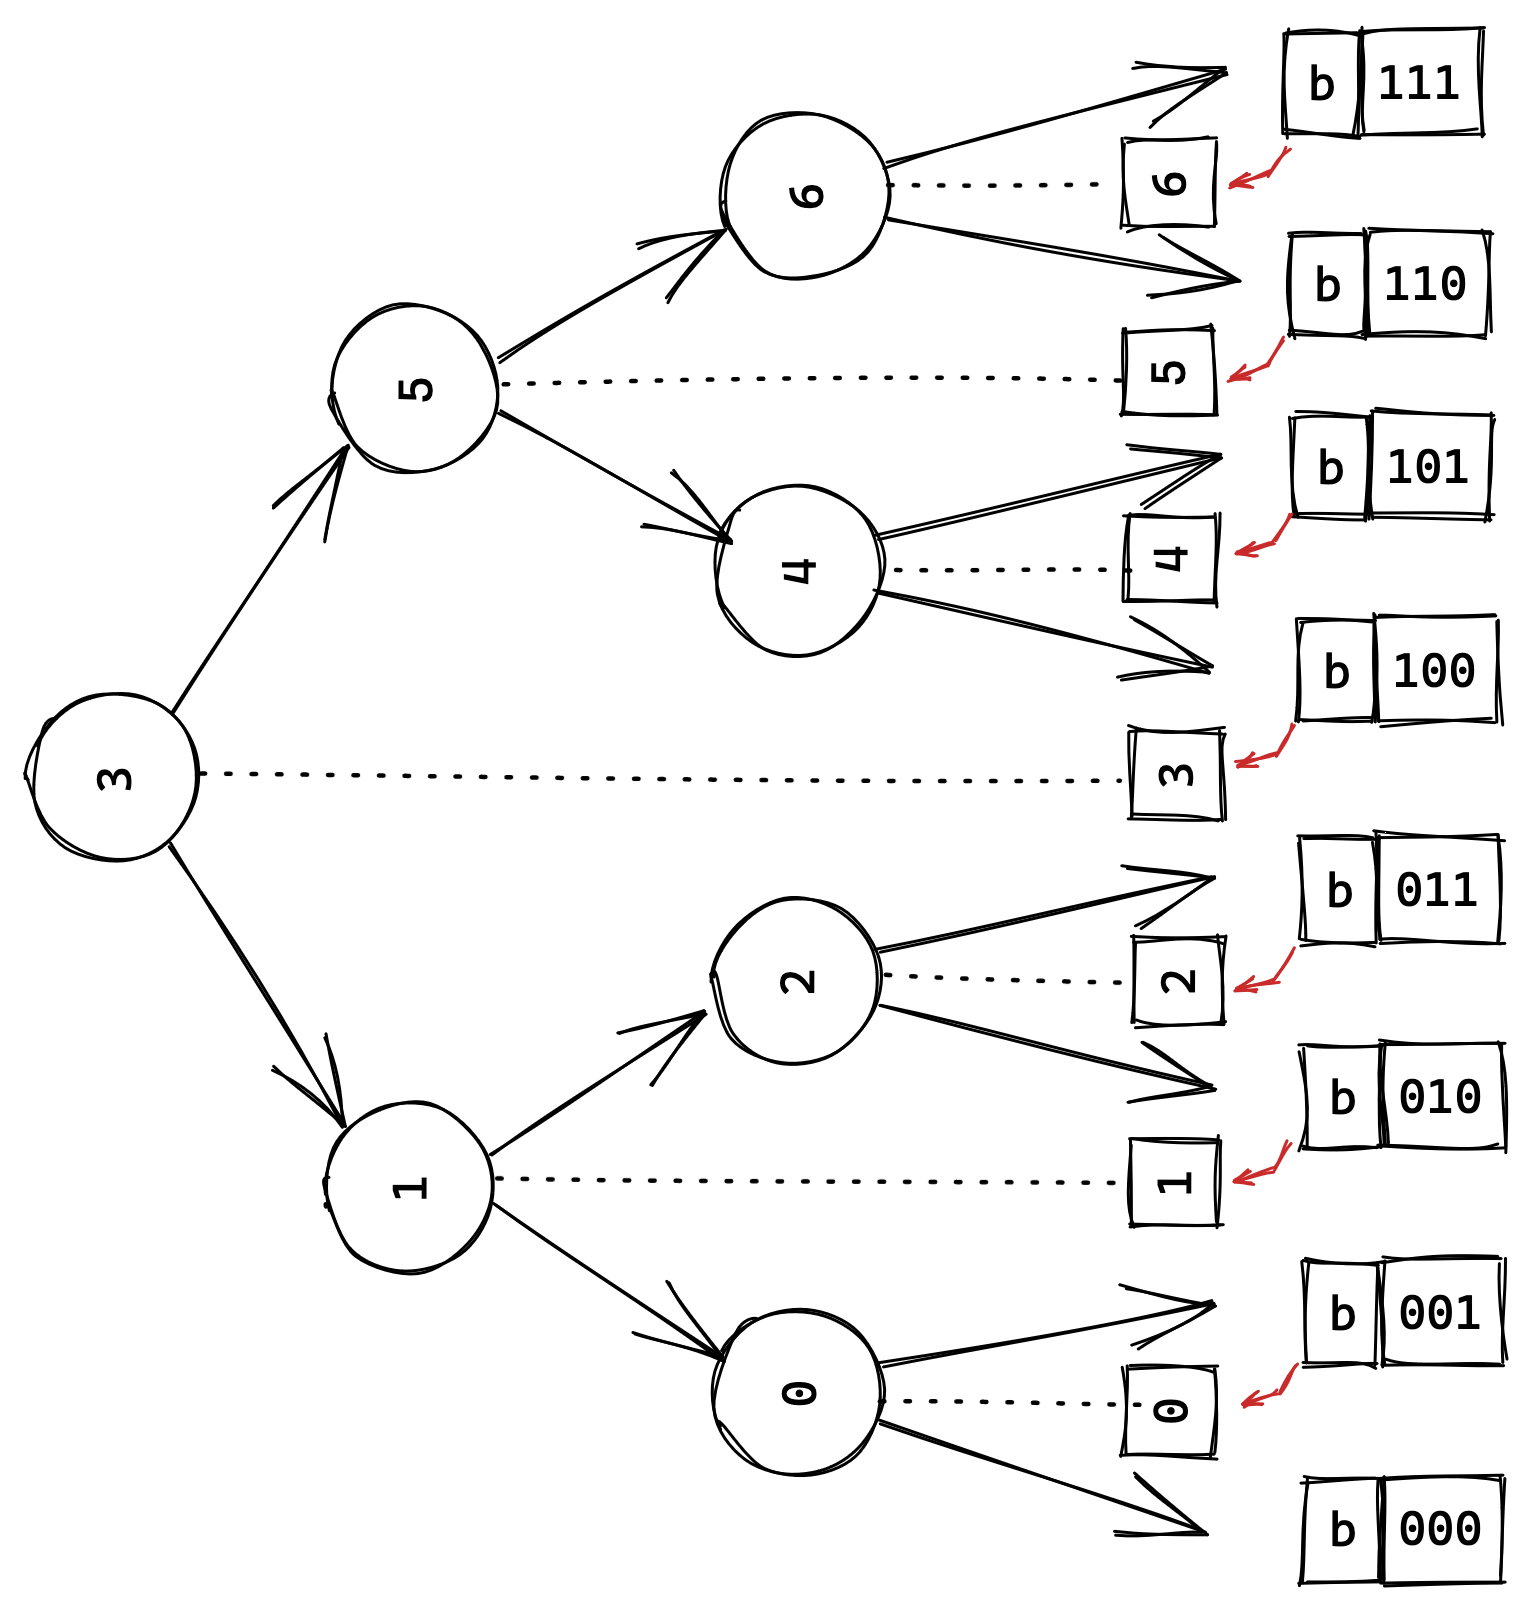 A full binary search tree of size 7 with binary indices for the gaps between them.